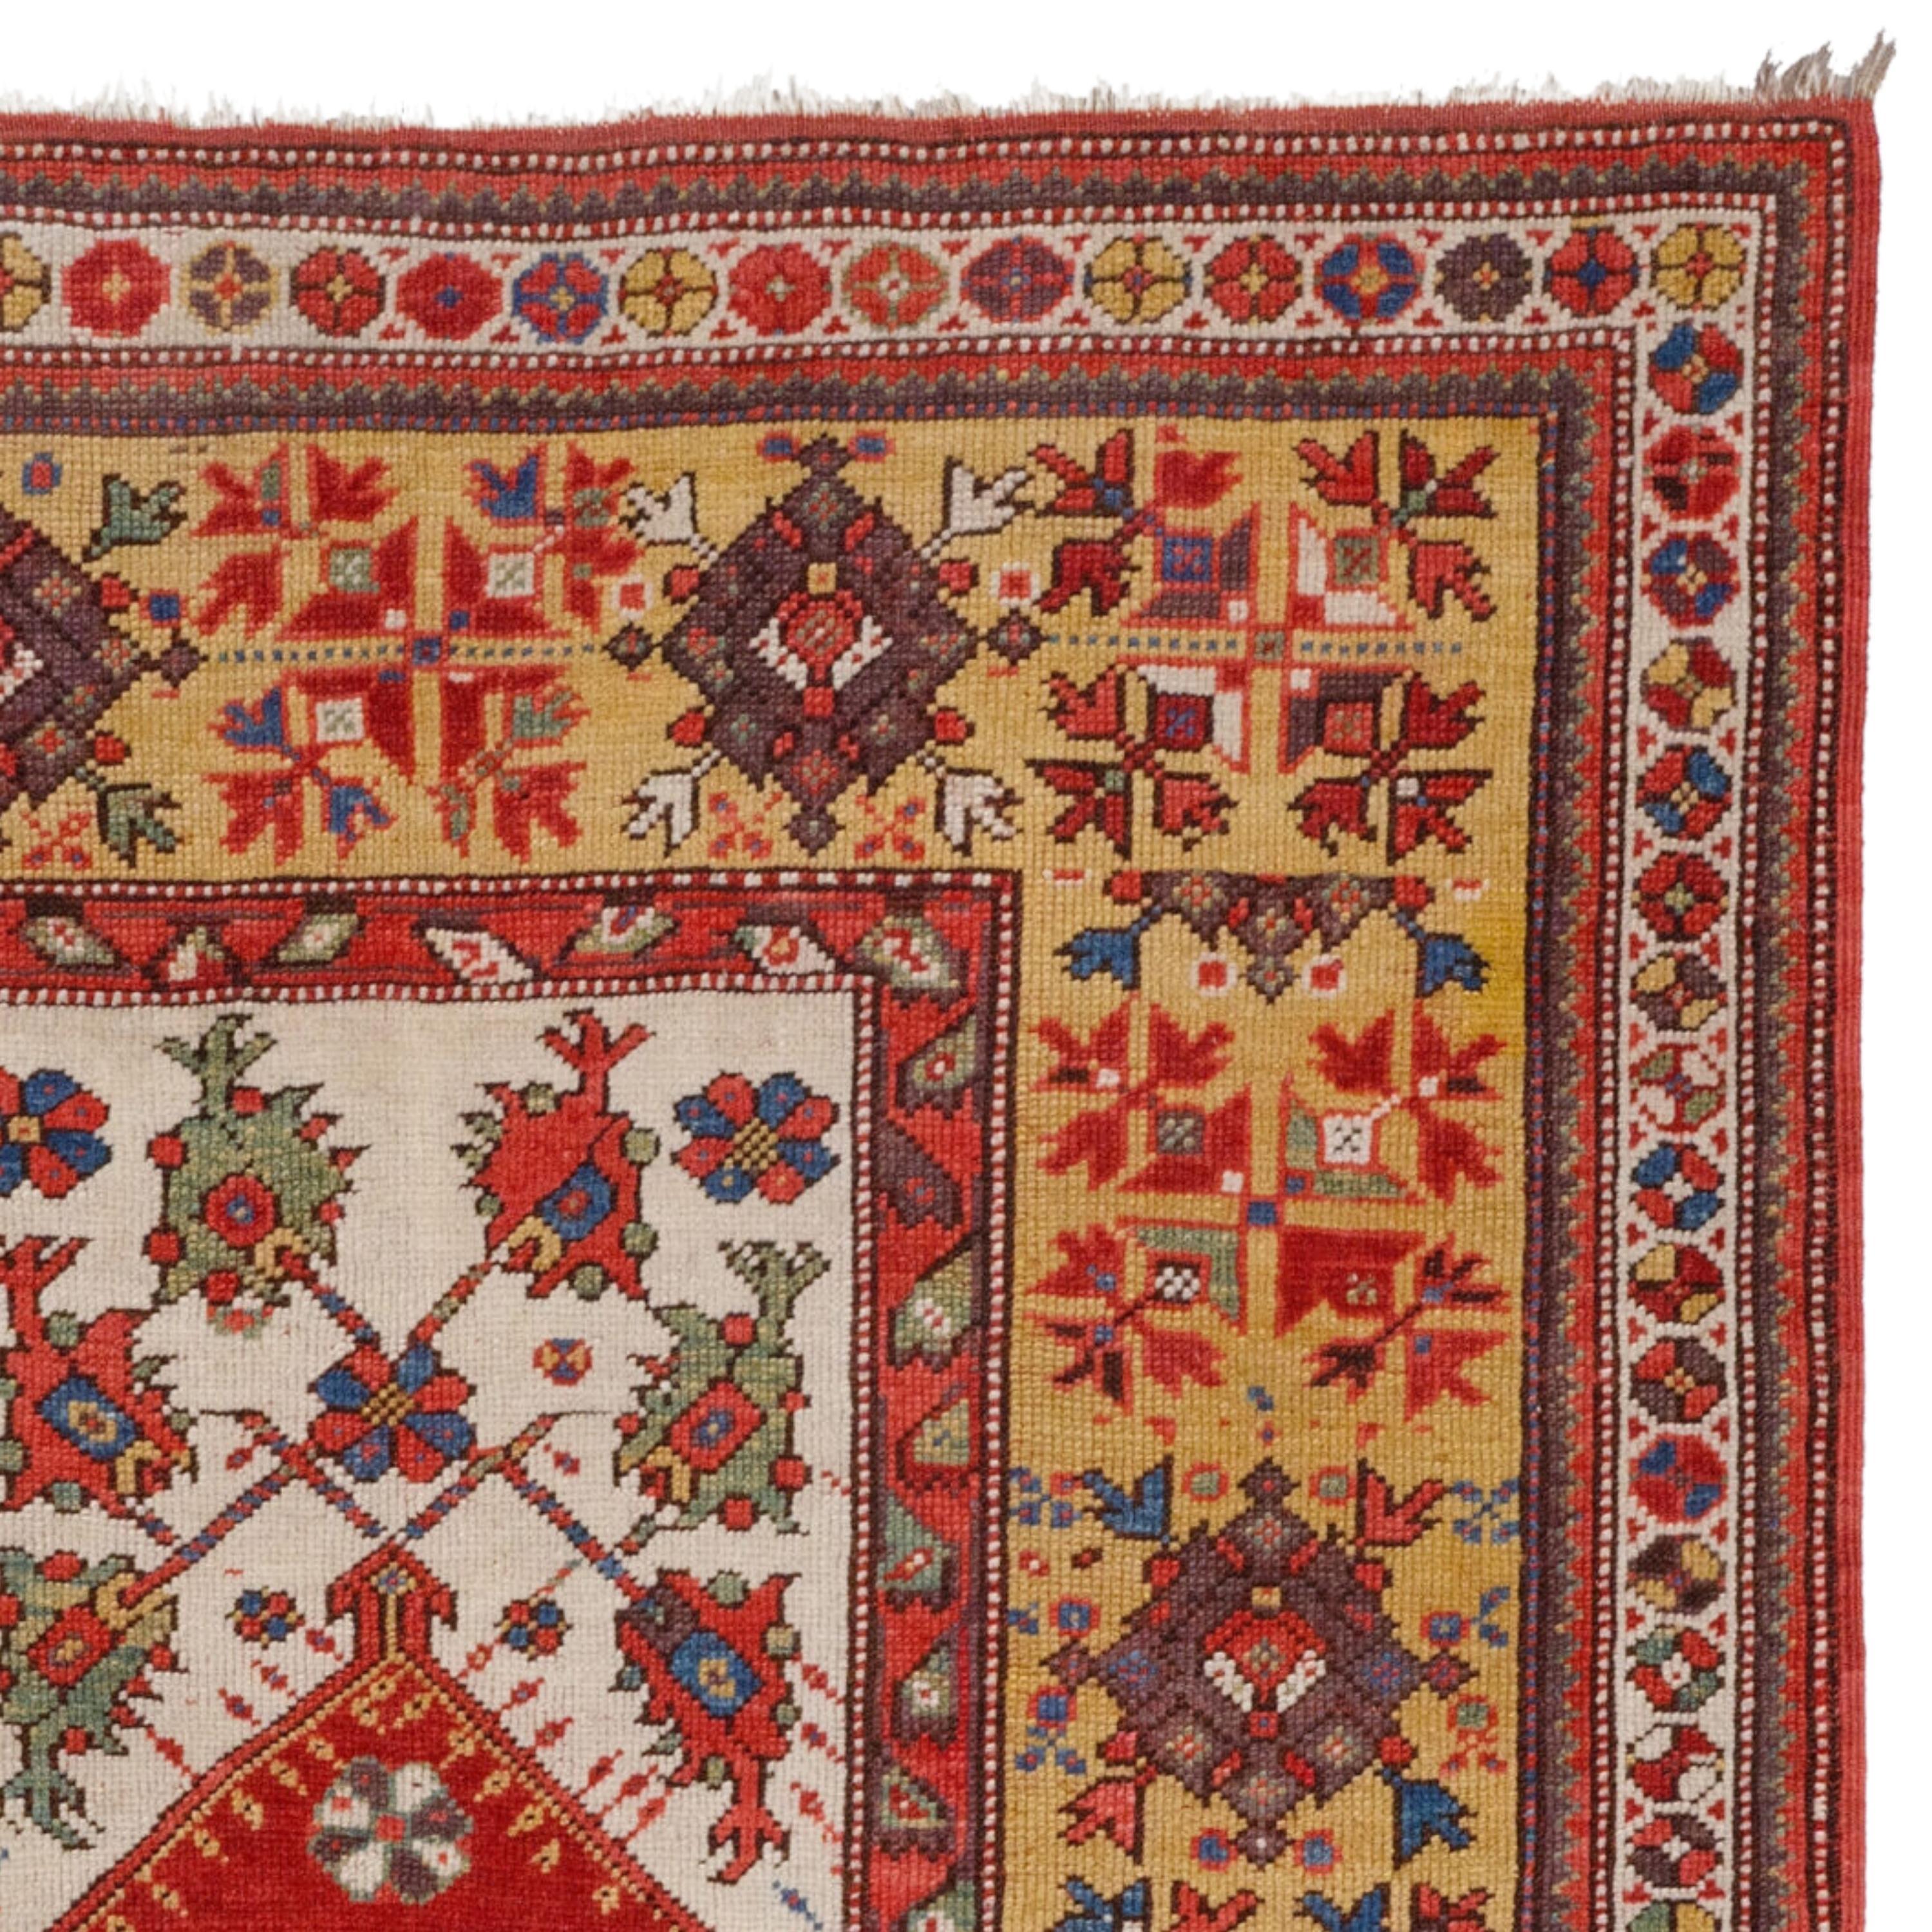 Antique Melas Prayer Rug - Middle Of The 19th Century Anatolian Milas Prayer Rug In Good Condition For Sale In Sultanahmet, 34